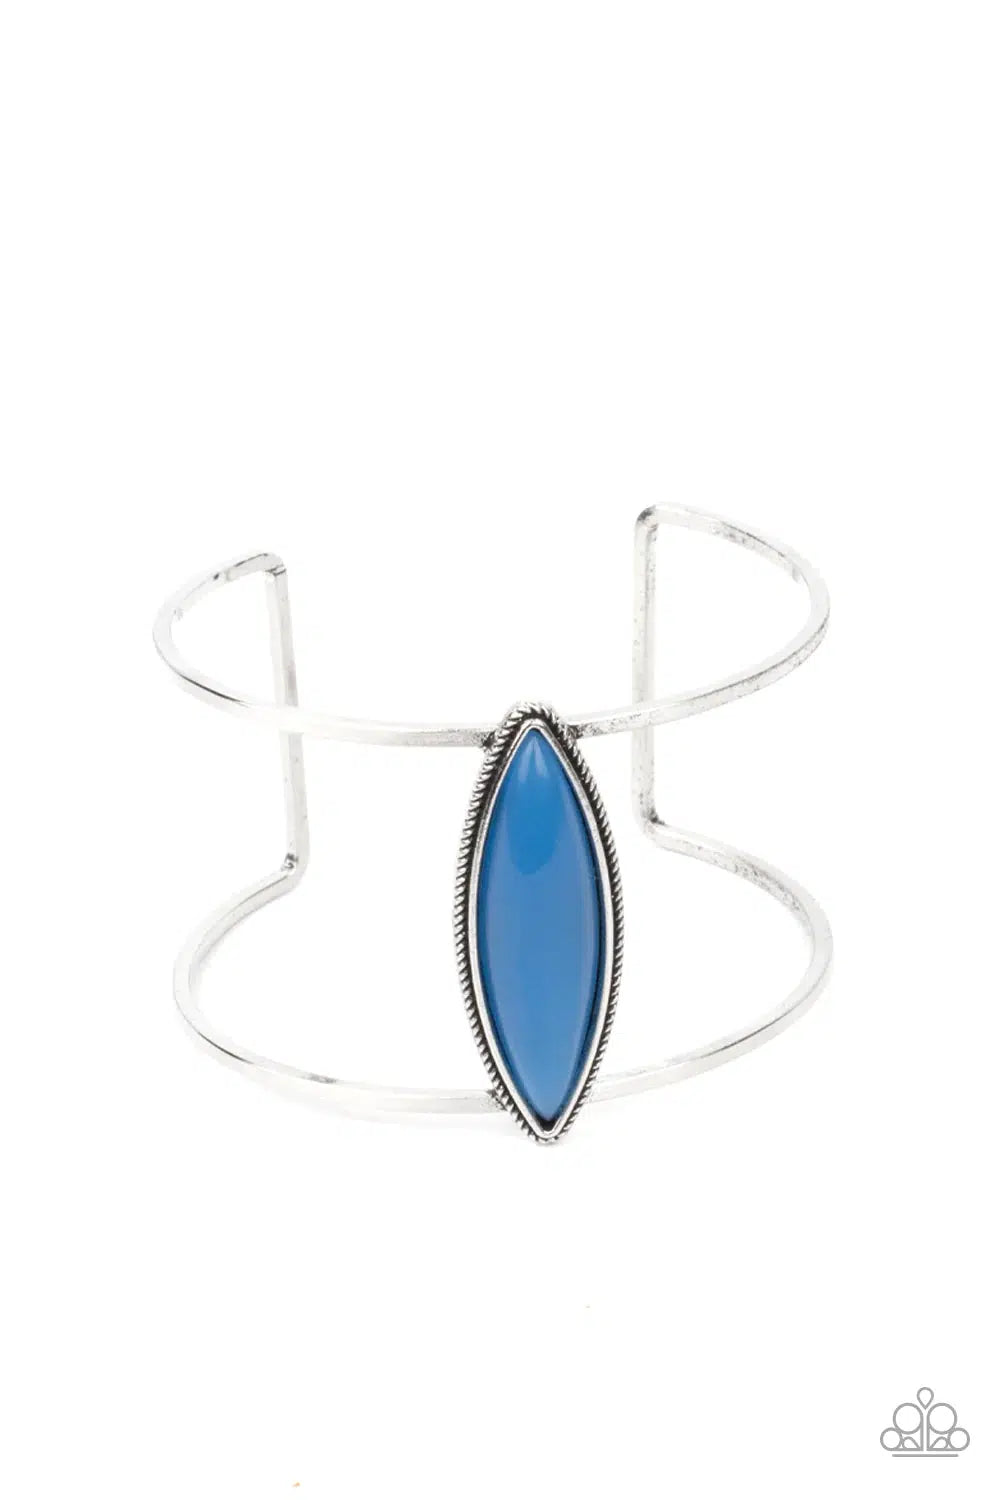 What You SEER is What You Get Blue Bracelet - Paparazzi Accessories- lightbox - CarasShop.com - $5 Jewelry by Cara Jewels